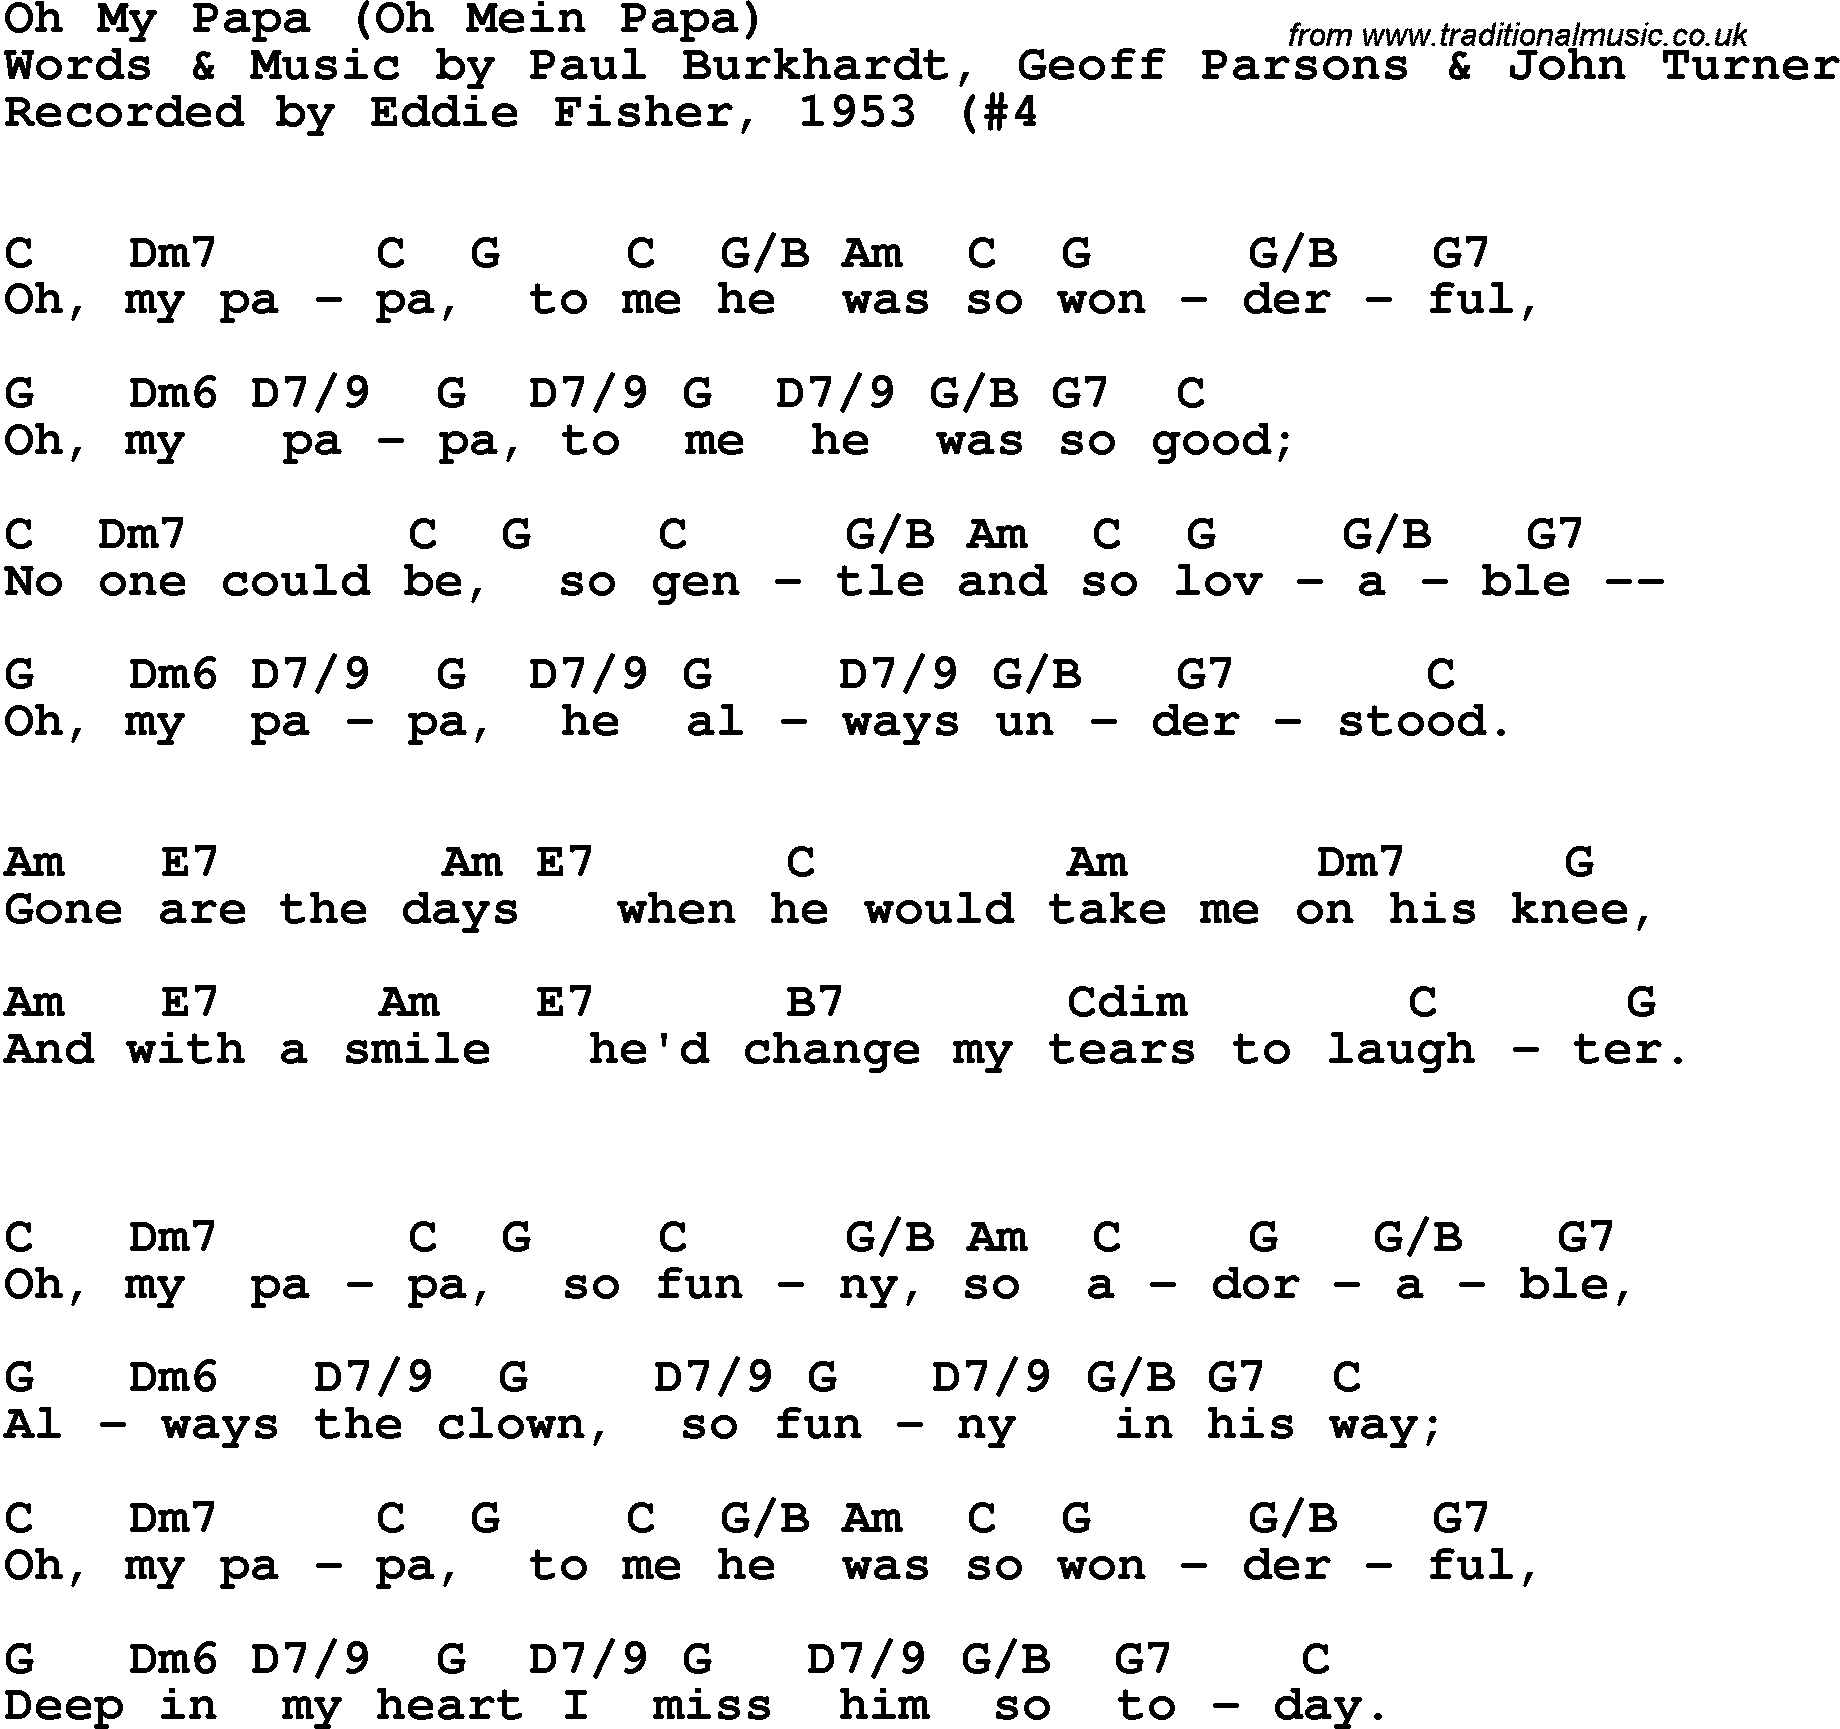 Song Lyrics with guitar chords for Oh My Papa - Eddie Fisher, 1953